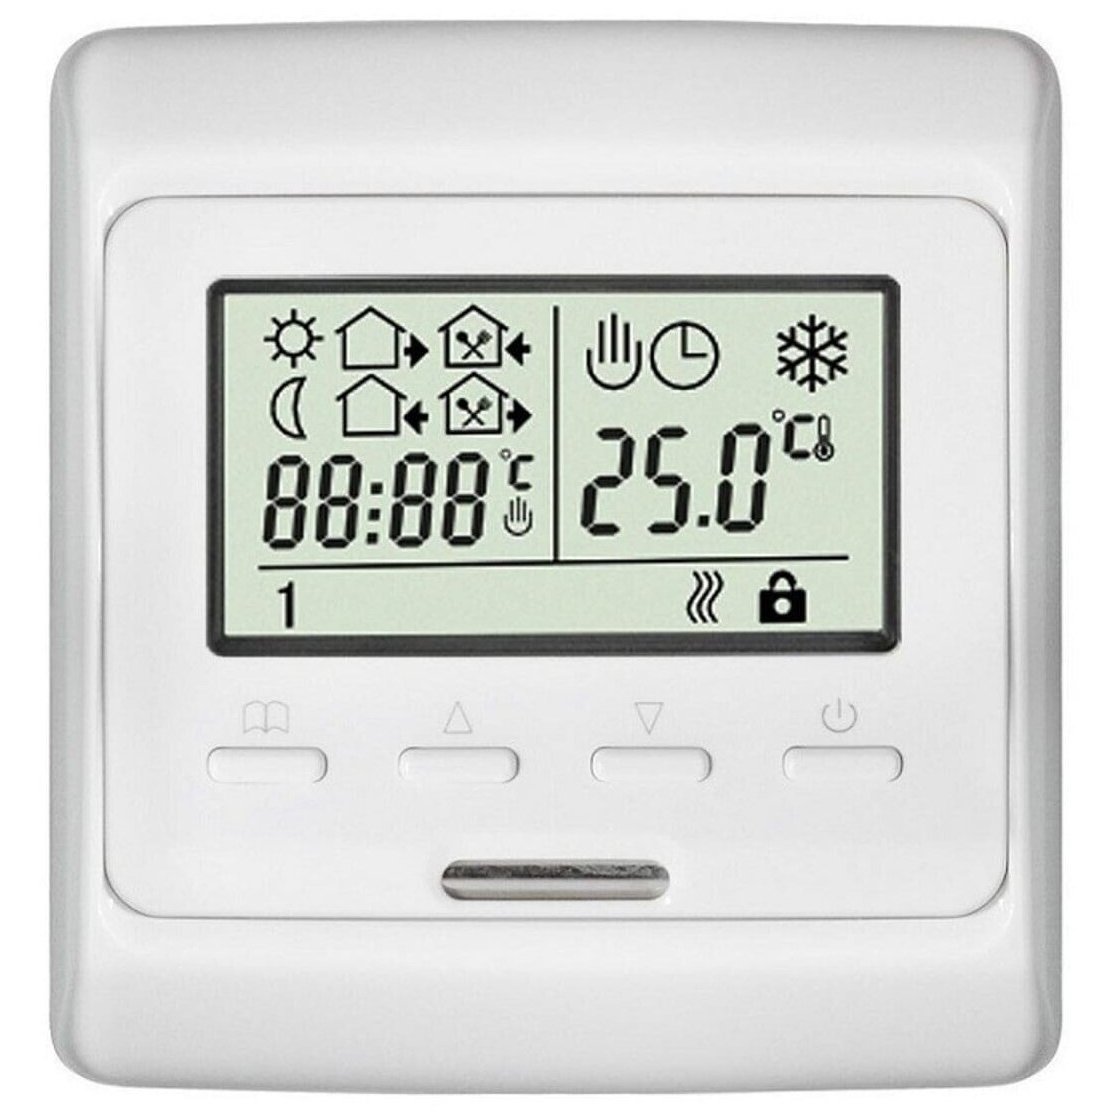 In-Therm E 51